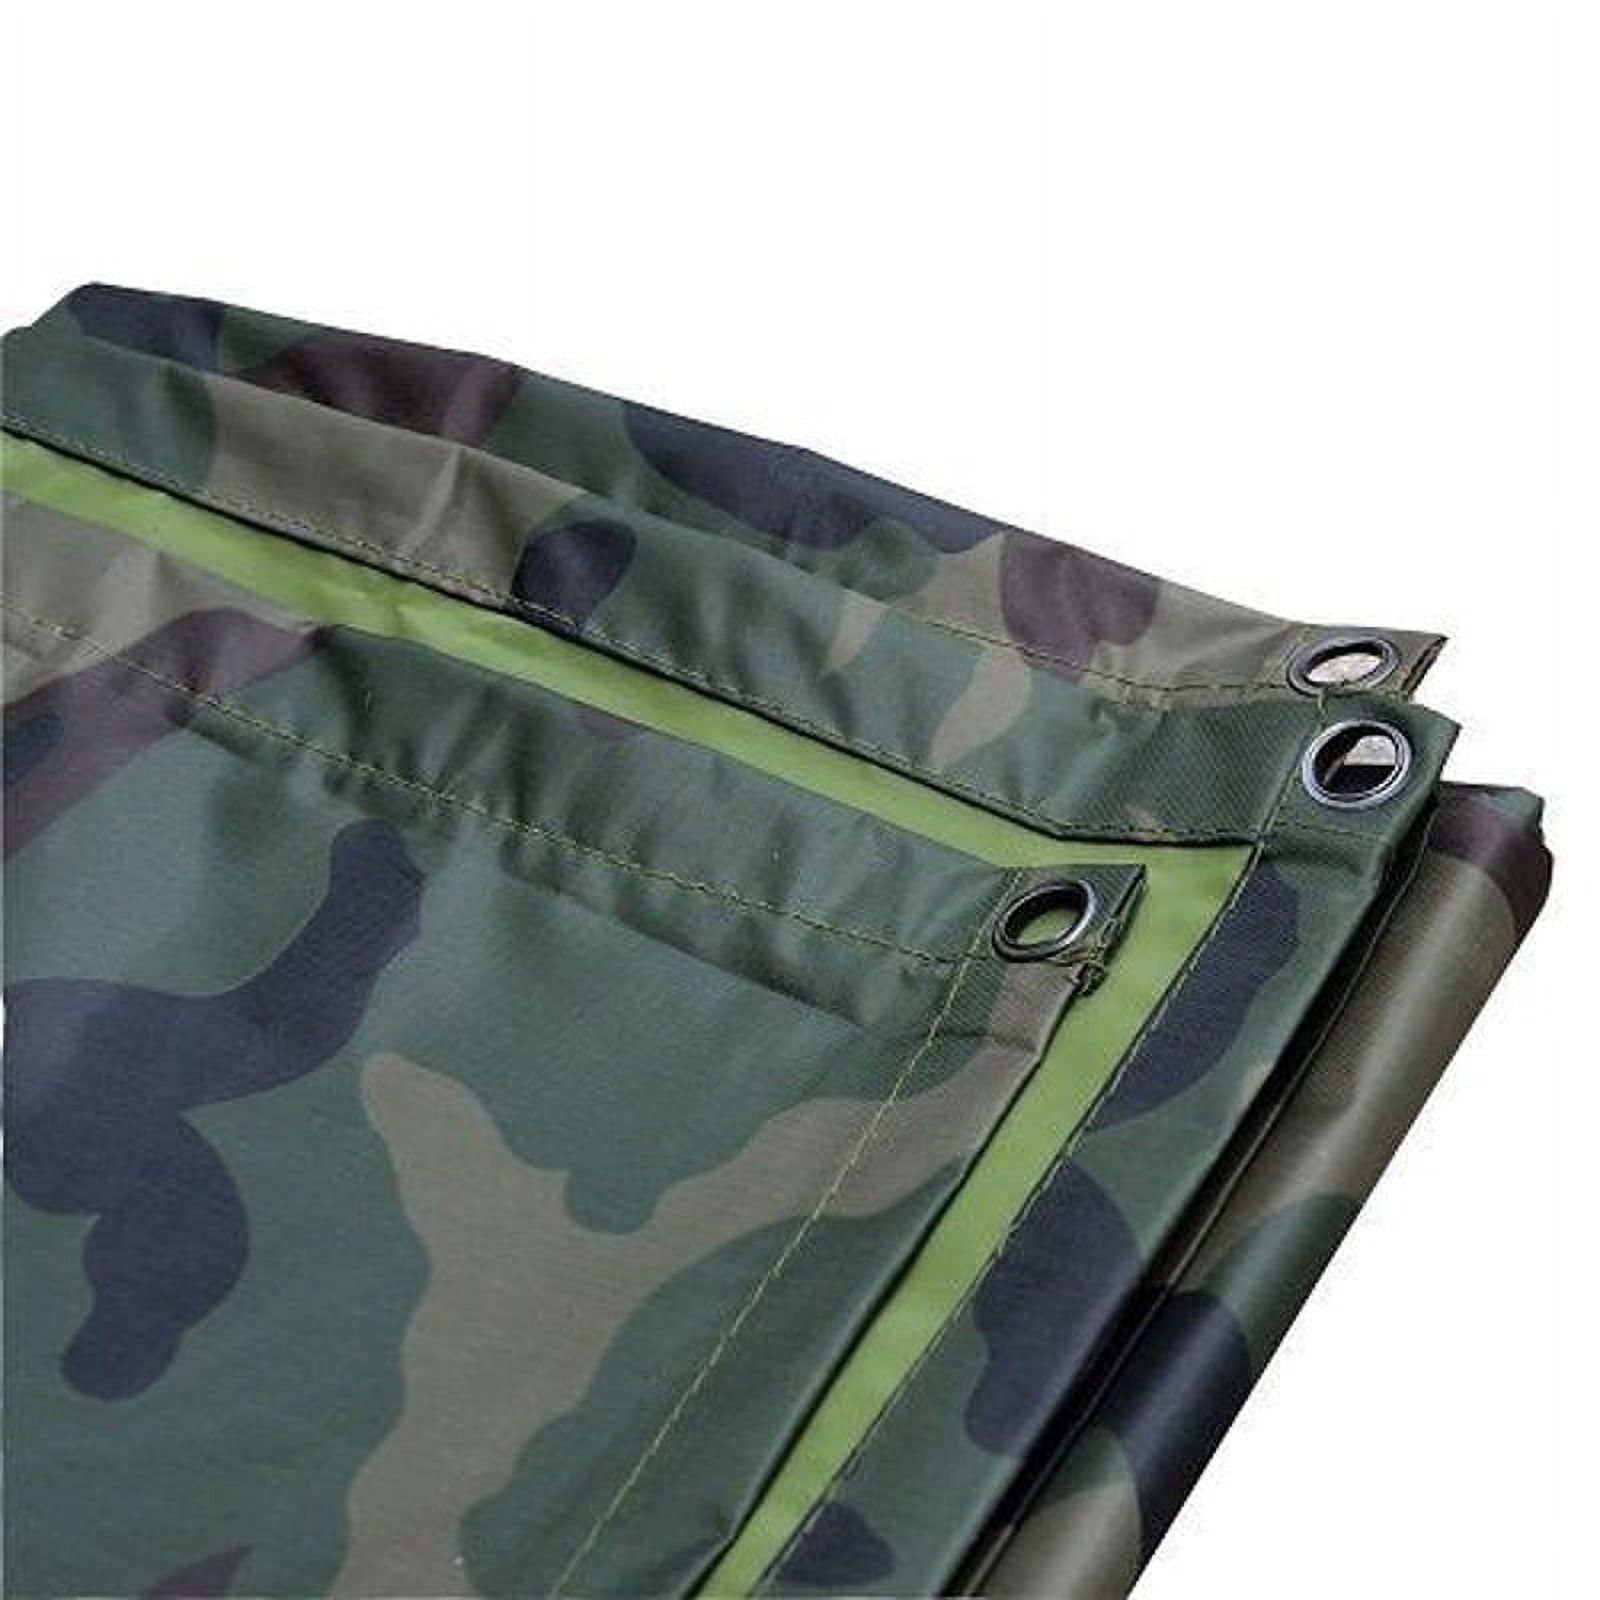 Army Combat Military Festival Poncho BTP Camo Waterproof Rain Cover Jacket - image 3 of 5